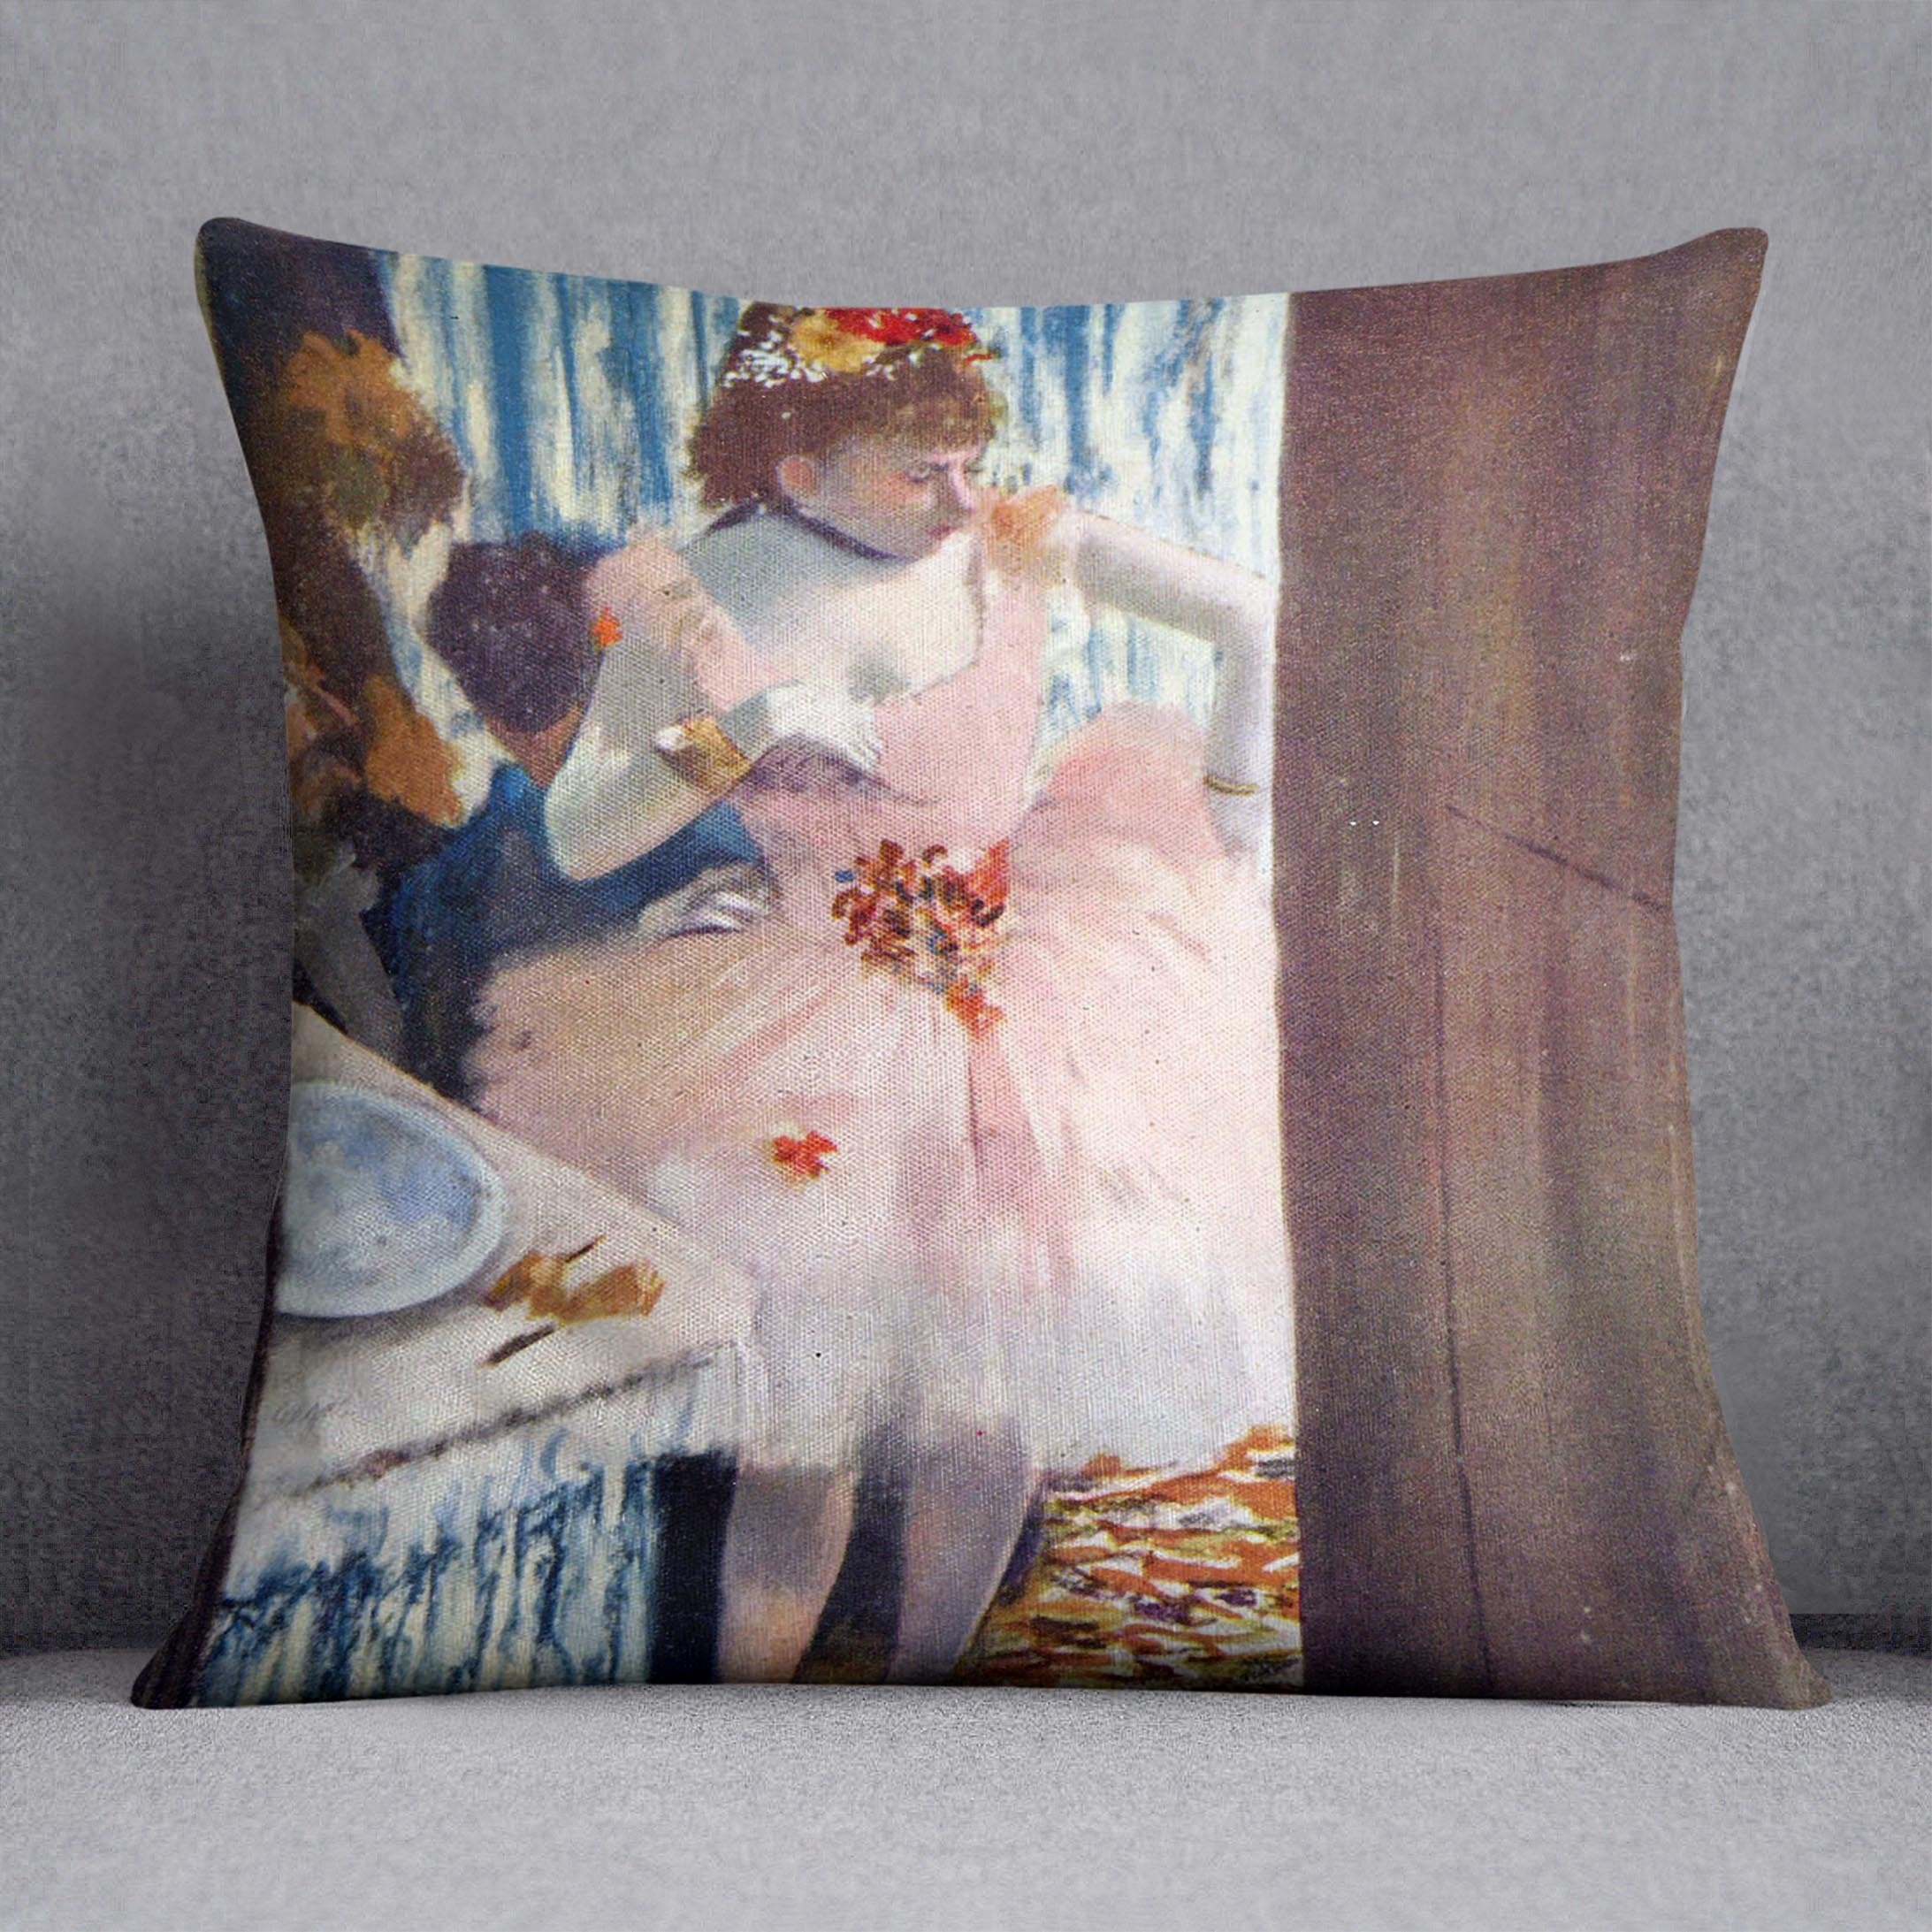 Dancer in the Loge by Degas Cushion